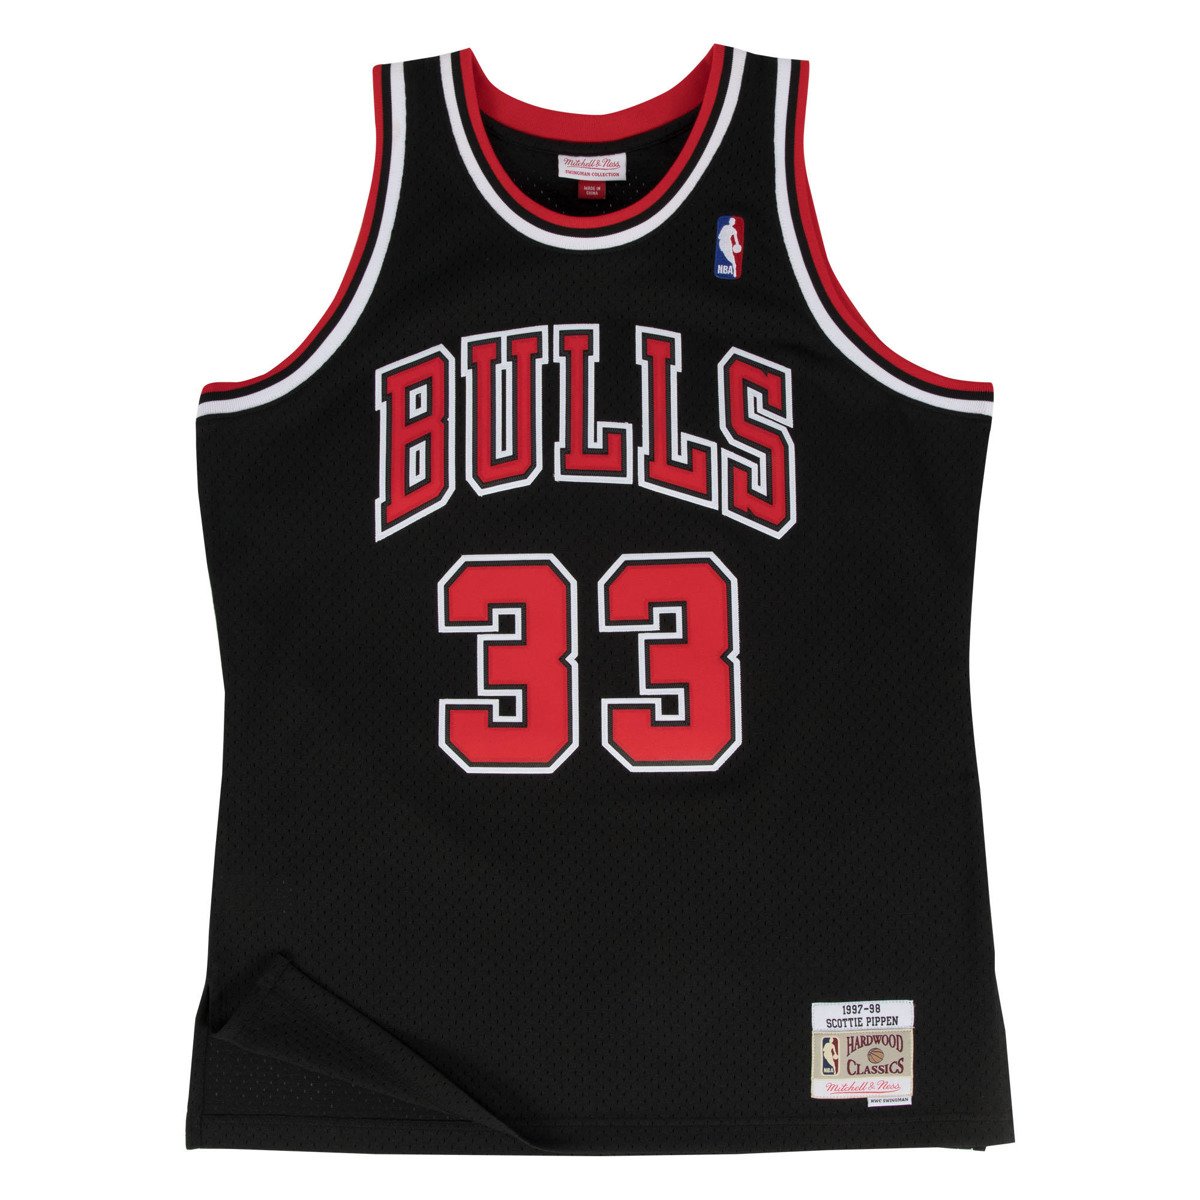 pippen jersey uk